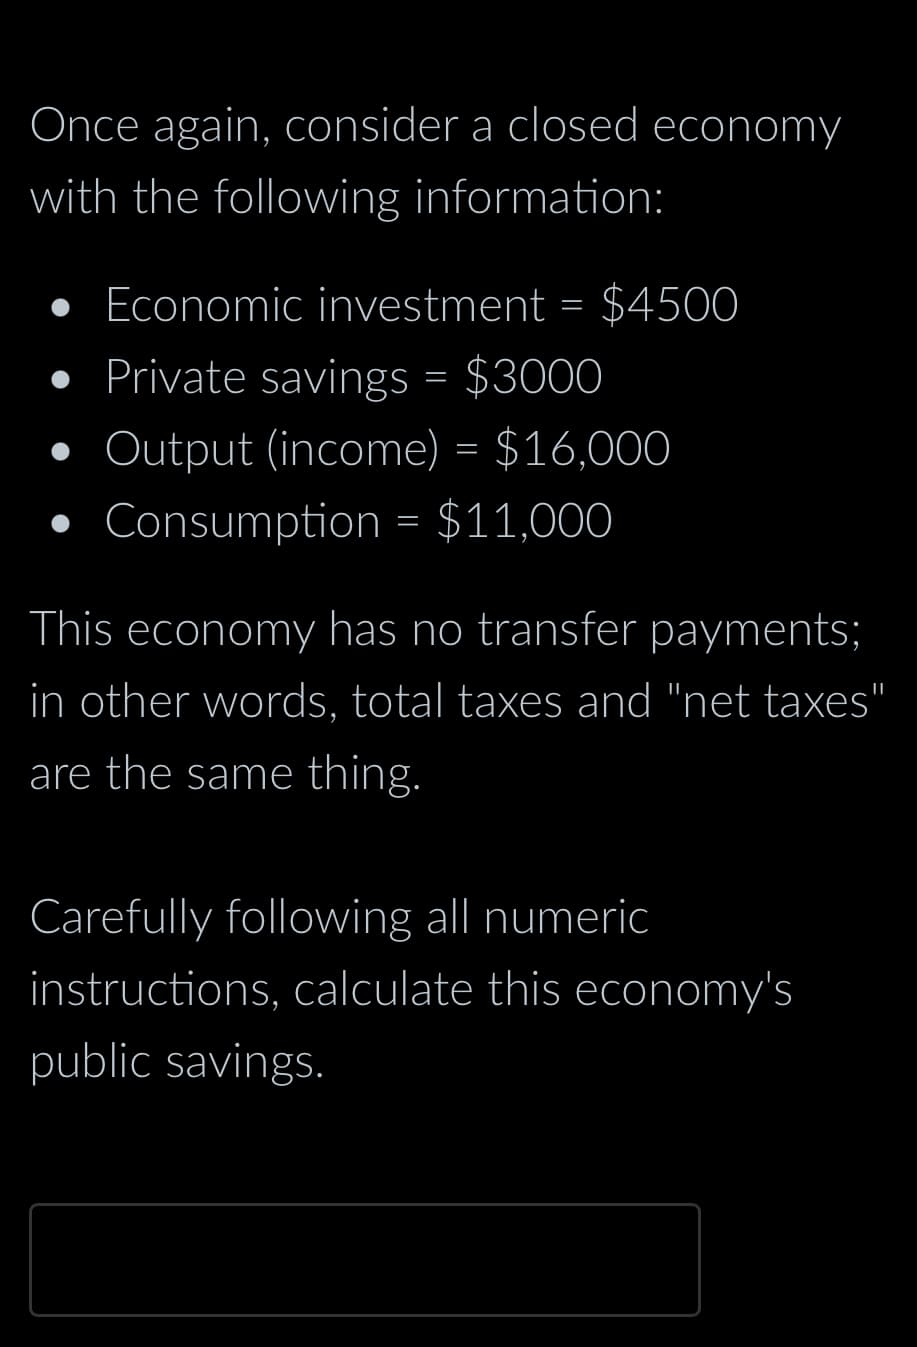 Once again, consider a closed economy
with the following information:
•
• Economic investment = $4500
Private savings = $3000
Output (income) = $16,000
Consumption = $11,000
This economy has no transfer payments;
in other words, total taxes and "net taxes"
are the same thing.
Carefully following all numeric
instructions, calculate this economy's
public savings.